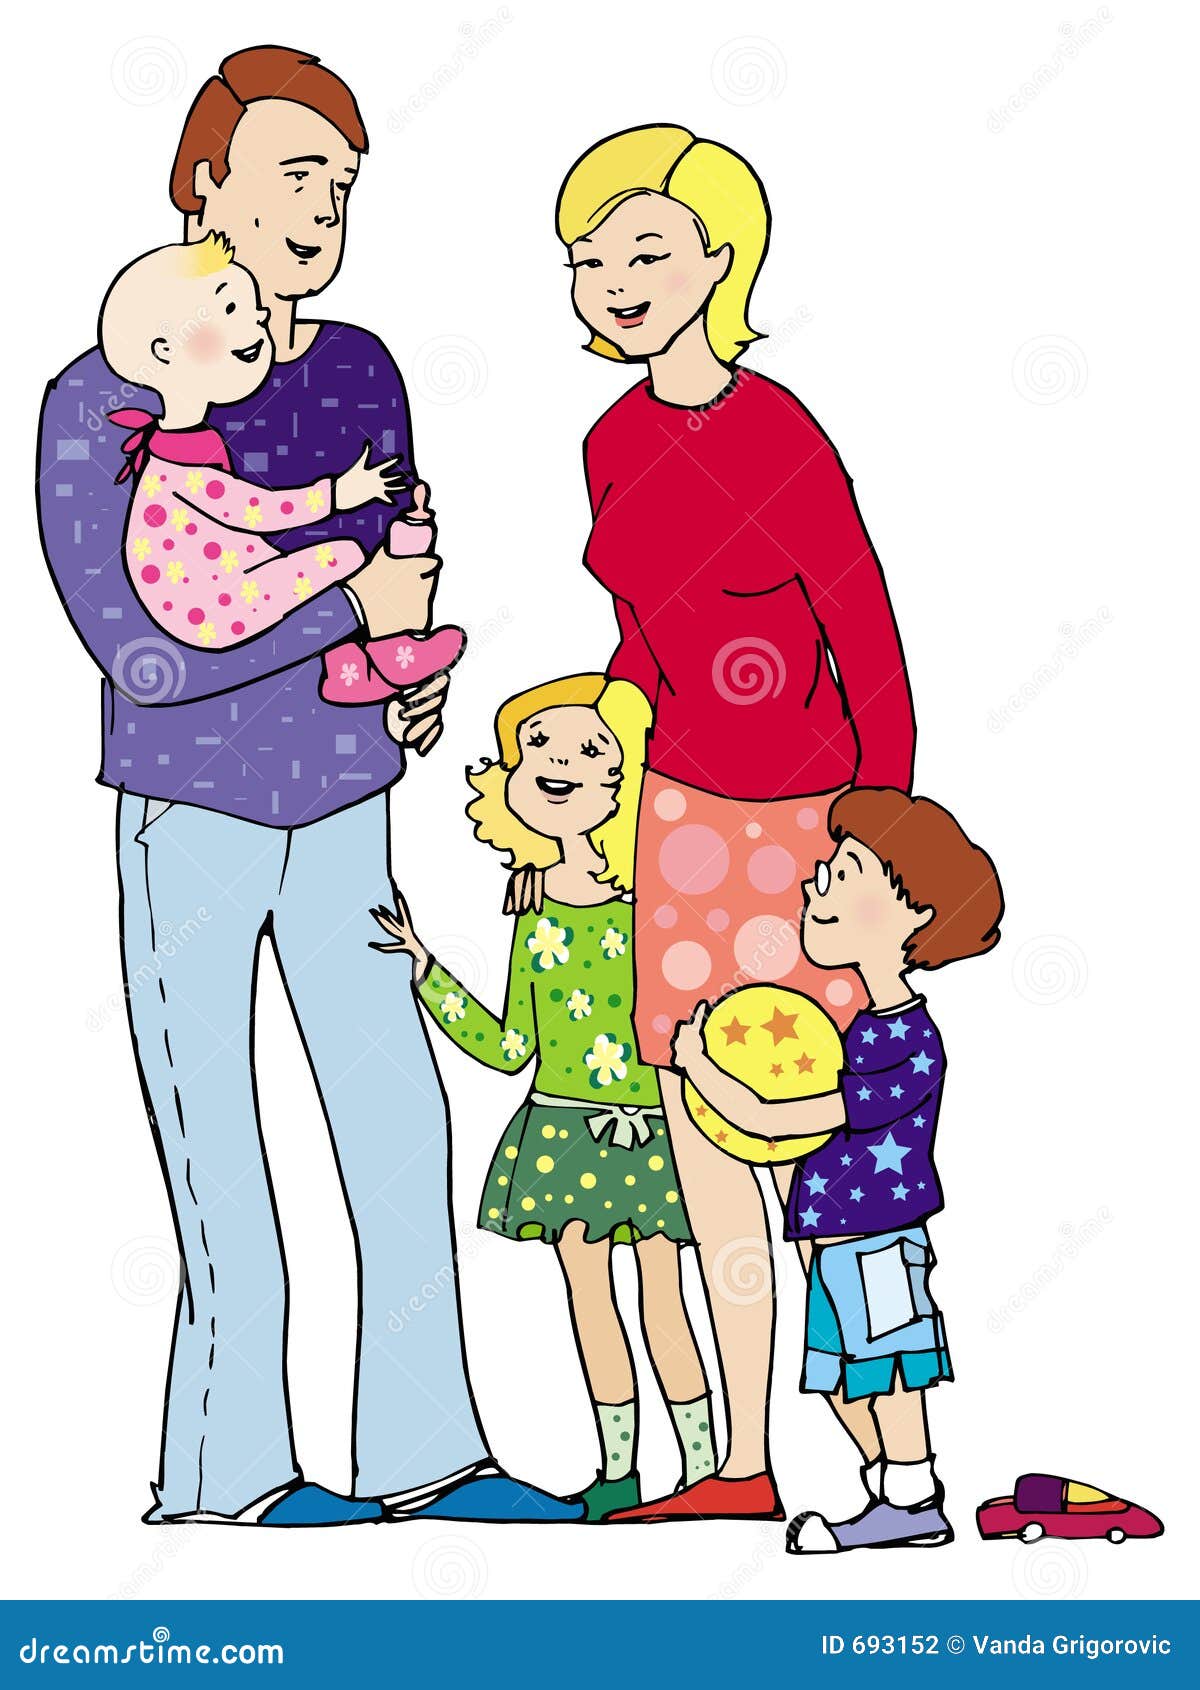 family business clipart - photo #32